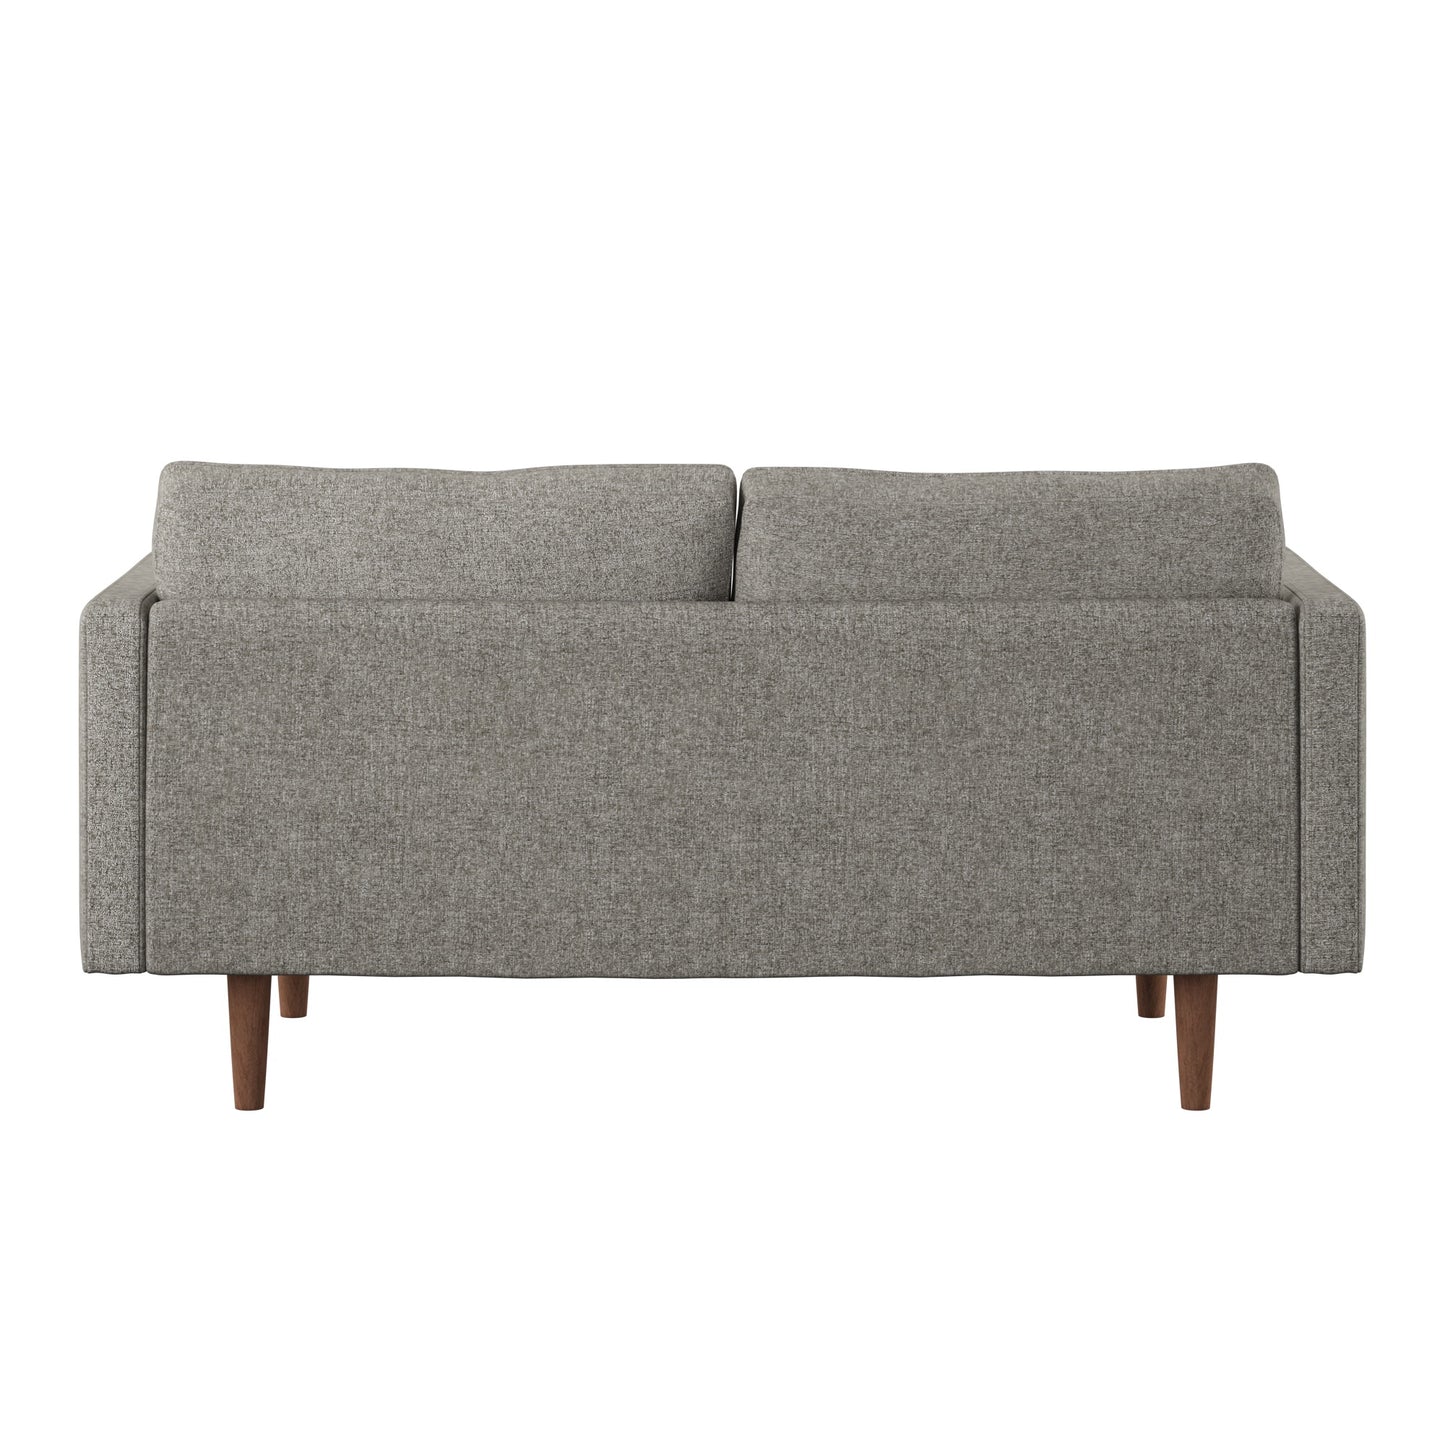 Mid-Century Tapered Leg Loveseat with Pillows - Grey